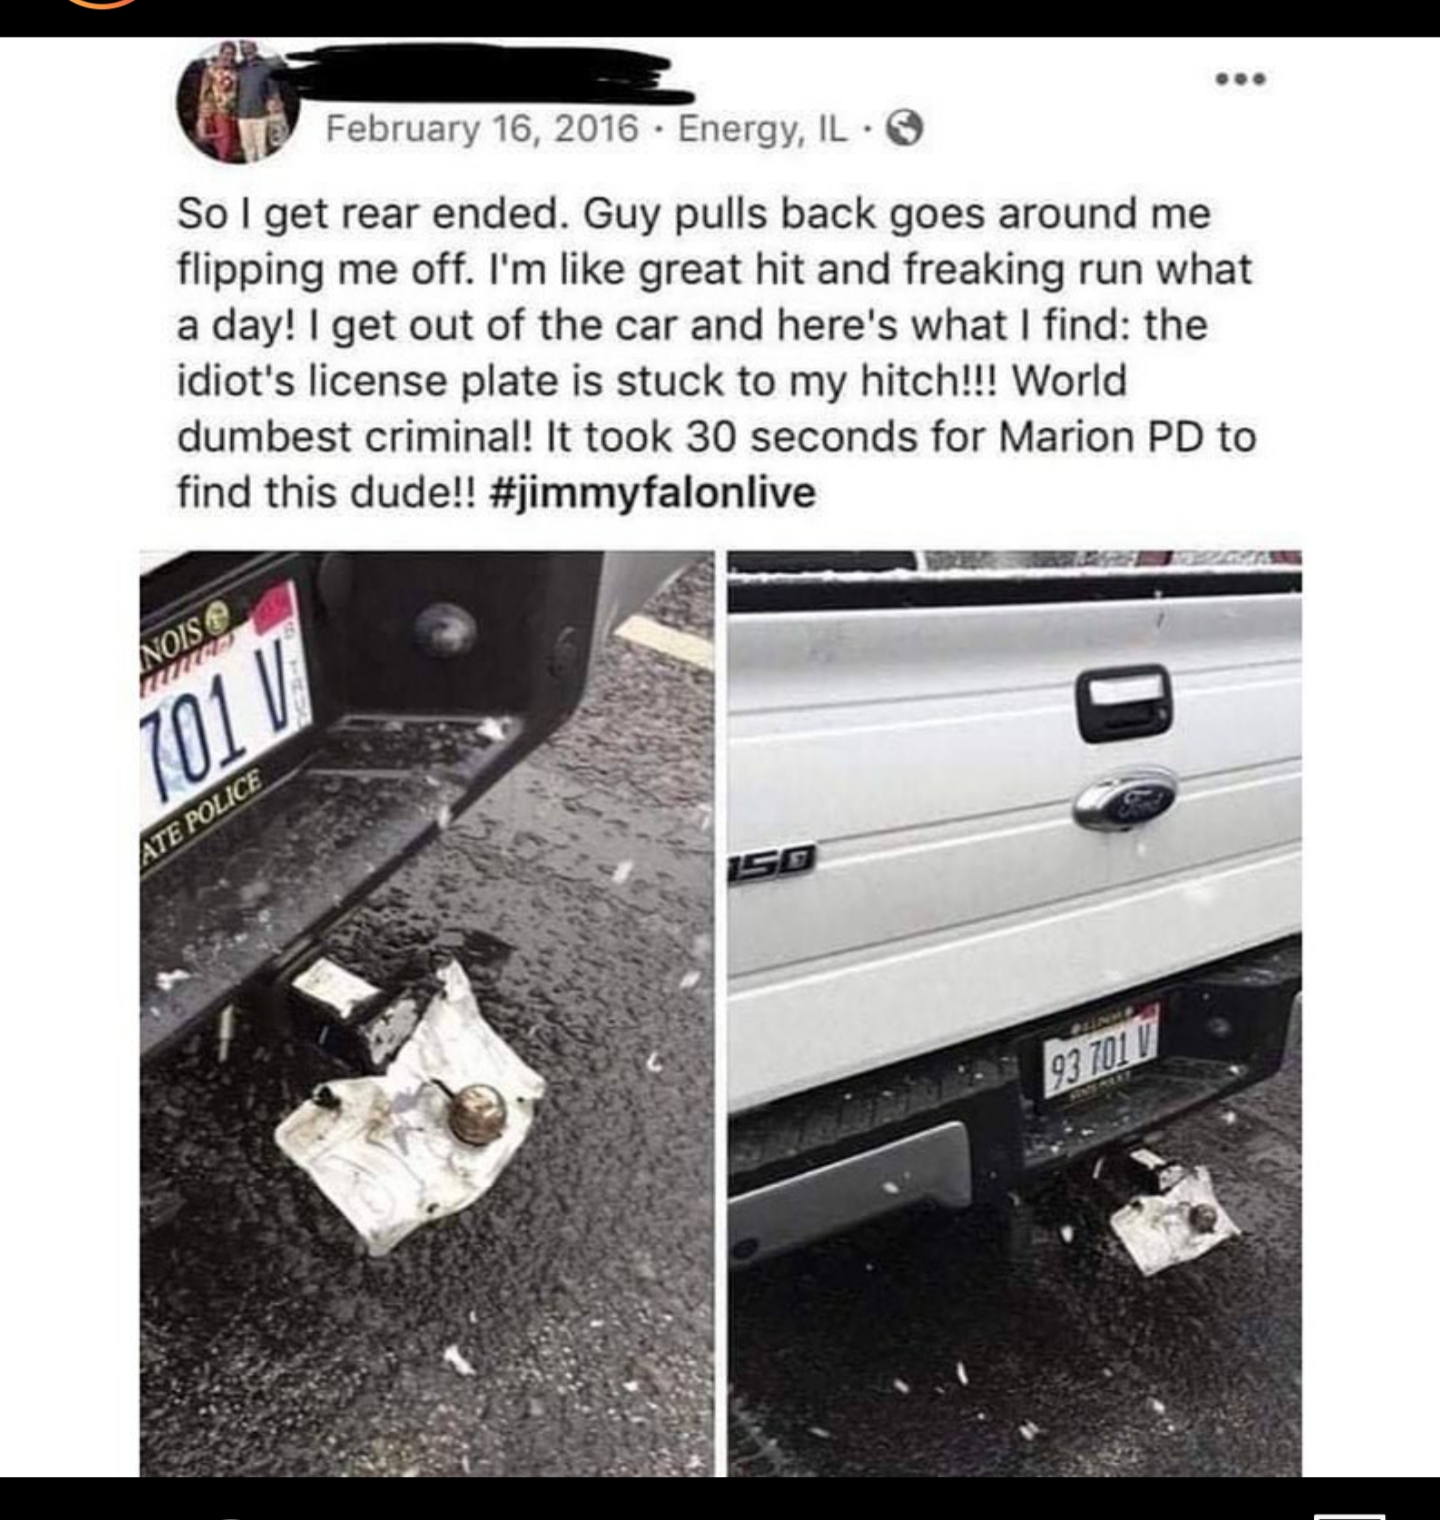 funny meme - car hits truck with hitch - . Energy, Il. So I get rear ended. Guy pulls back goes around me flipping me off. I'm great hit and freaking run what a day! I get out of the car and here's what I find the idiot's license plate is stuck to my hitc